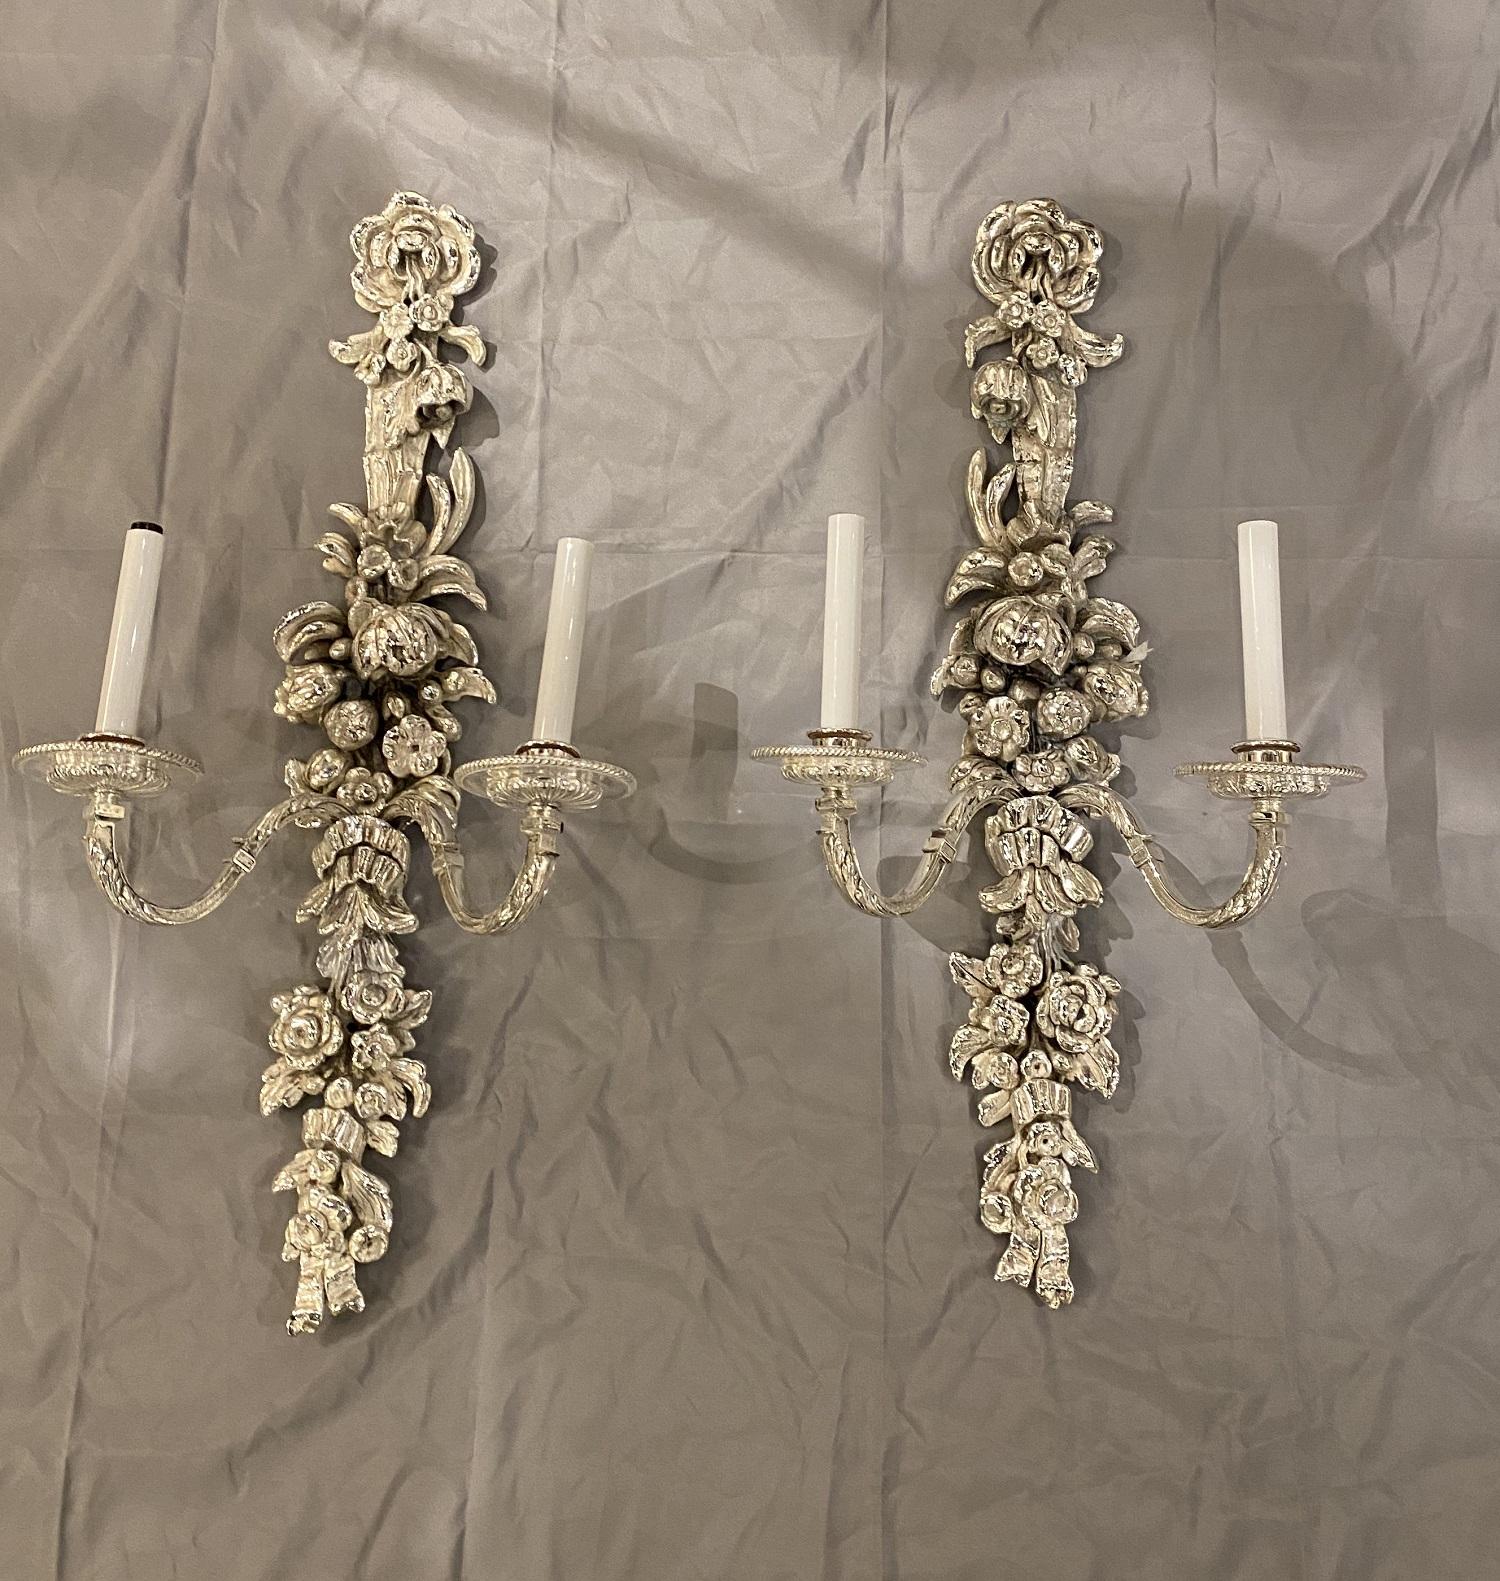 1900s Large Caldwell Silver Plated Sconces with flower design  In Good Condition For Sale In New York, NY